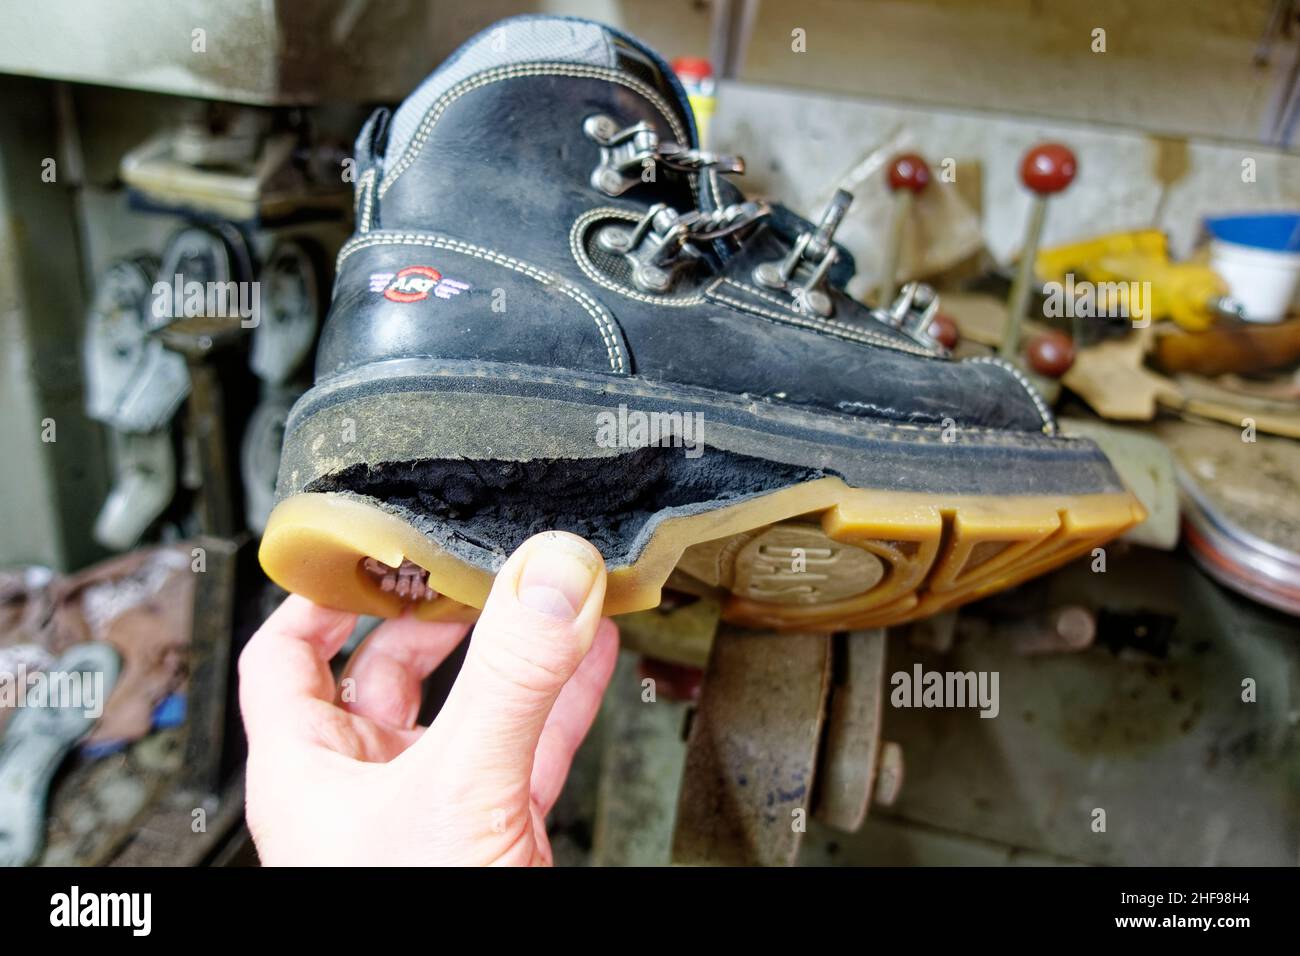 Kaputer Schuhe High Resolution Stock Photography and Images - Alamy